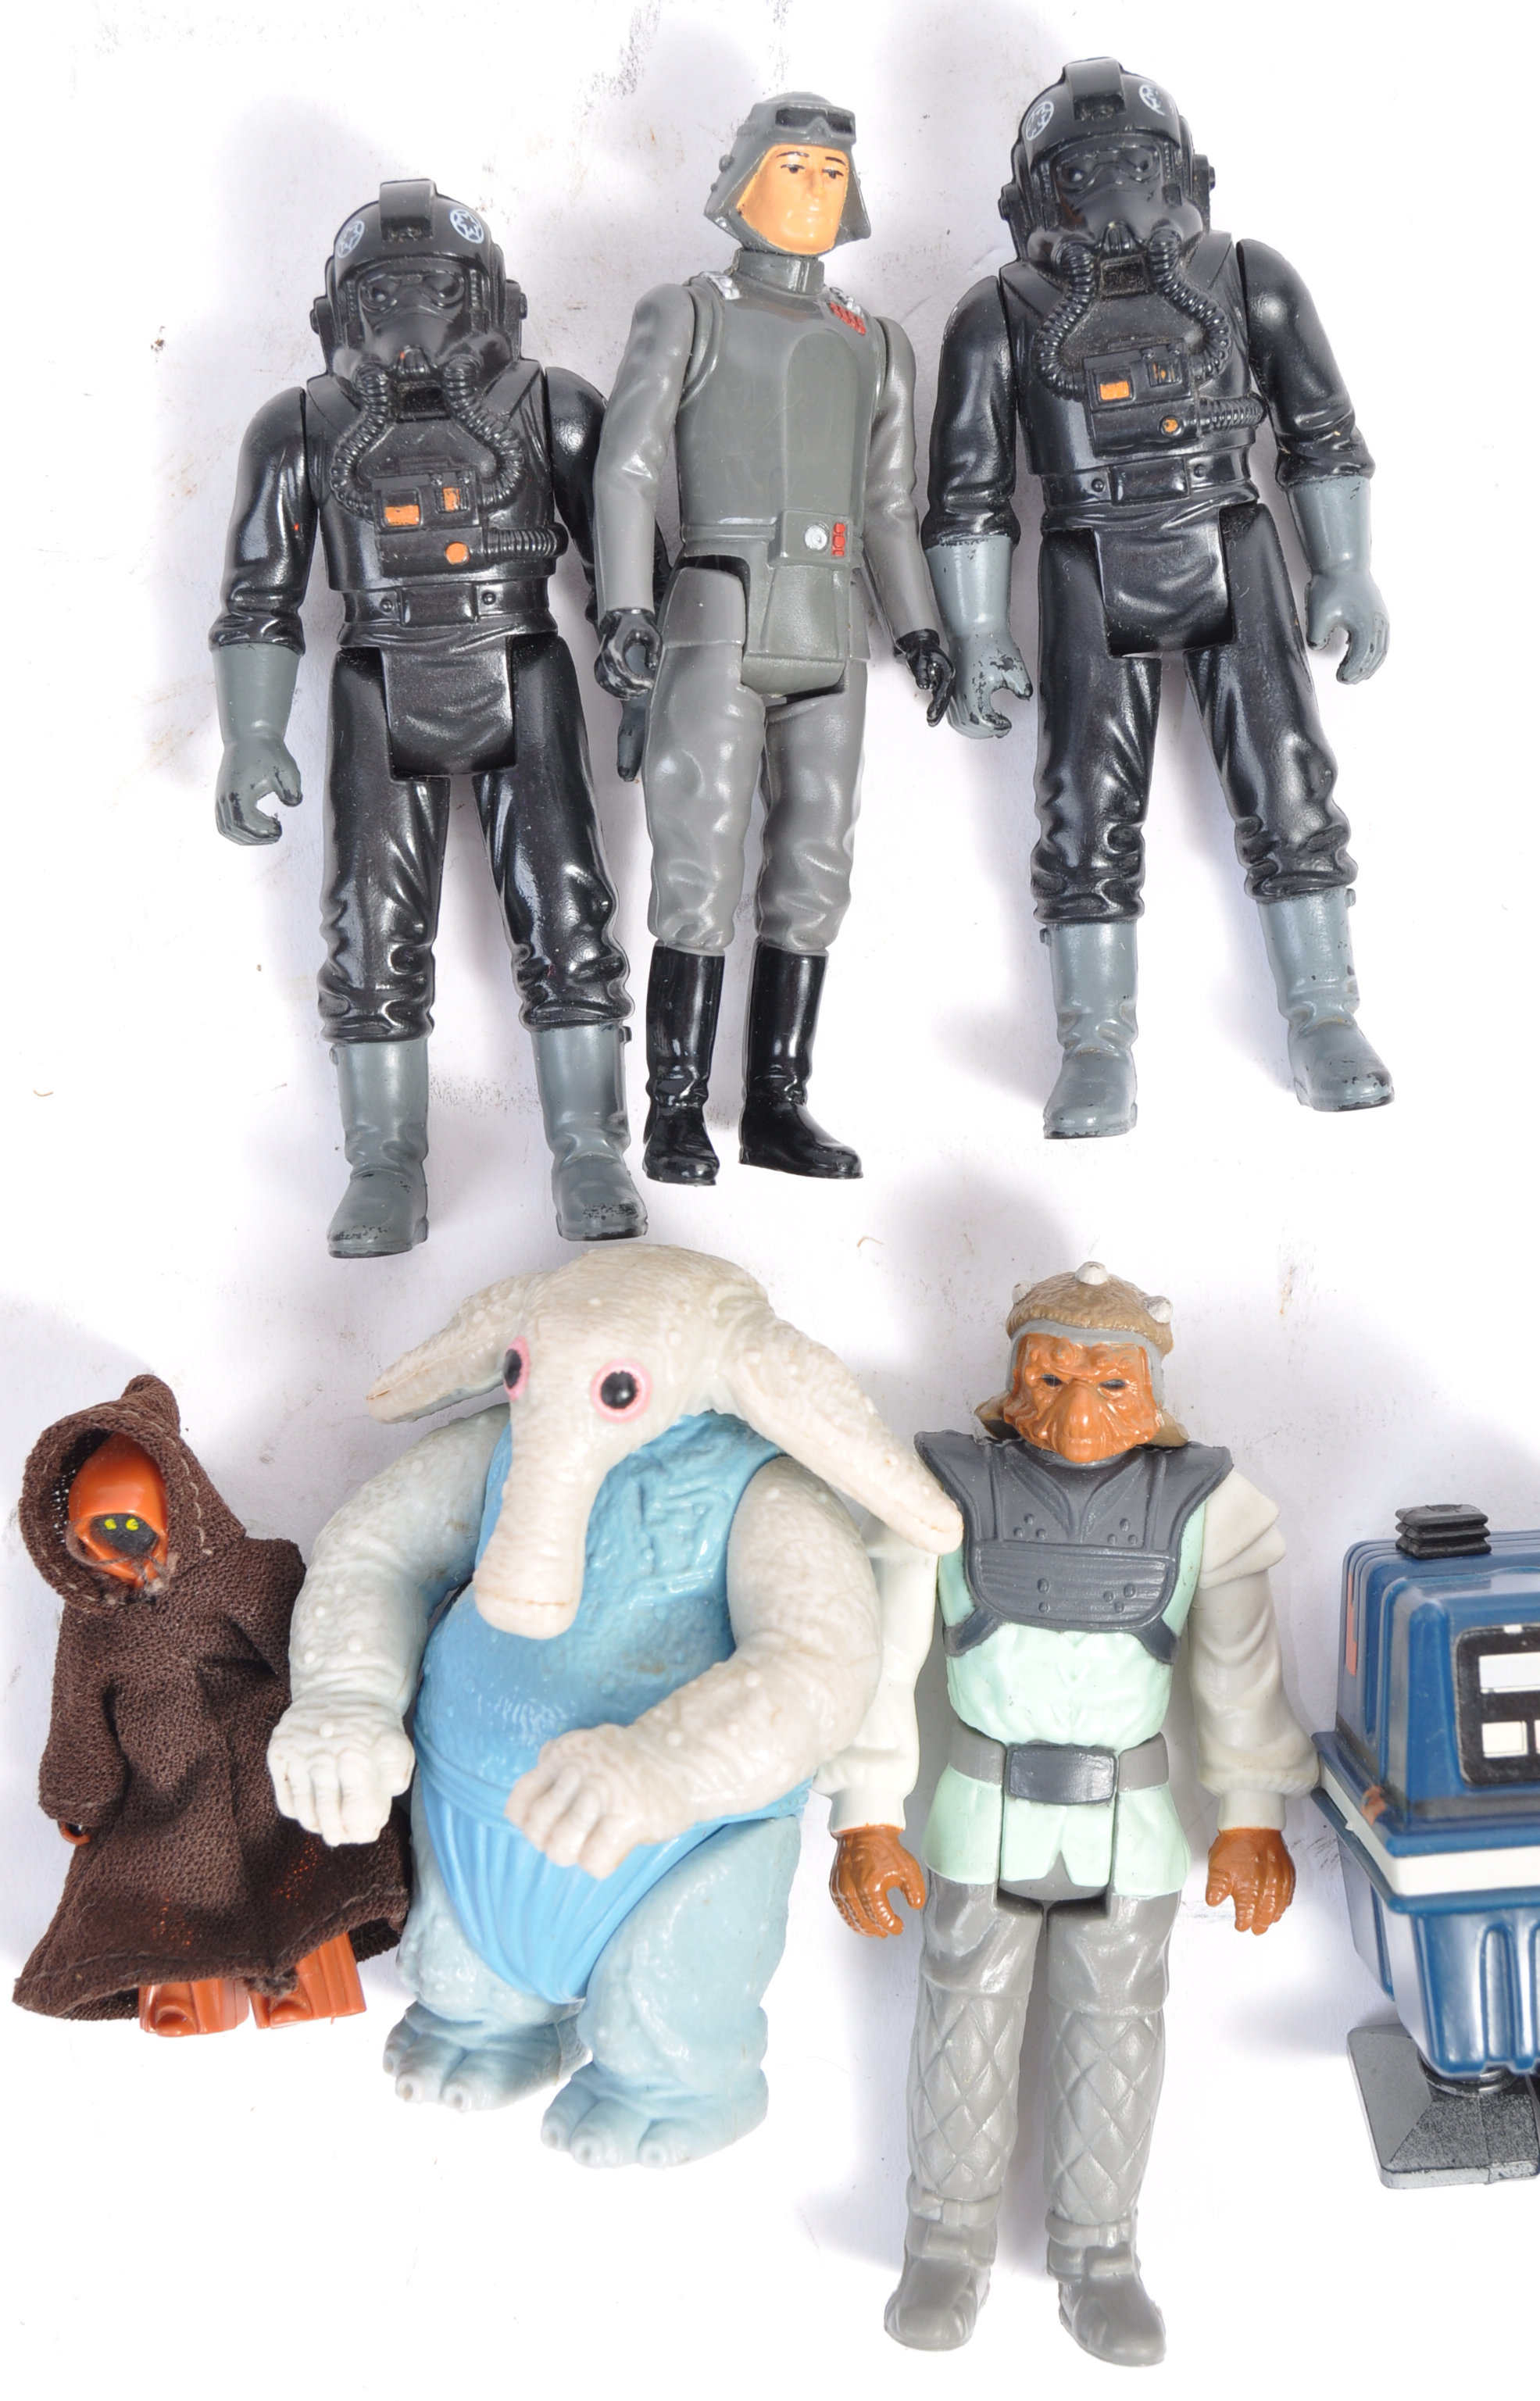 COLLECTION OF VINTAGE STAR WARS ACTION FIGURES - Image 3 of 3